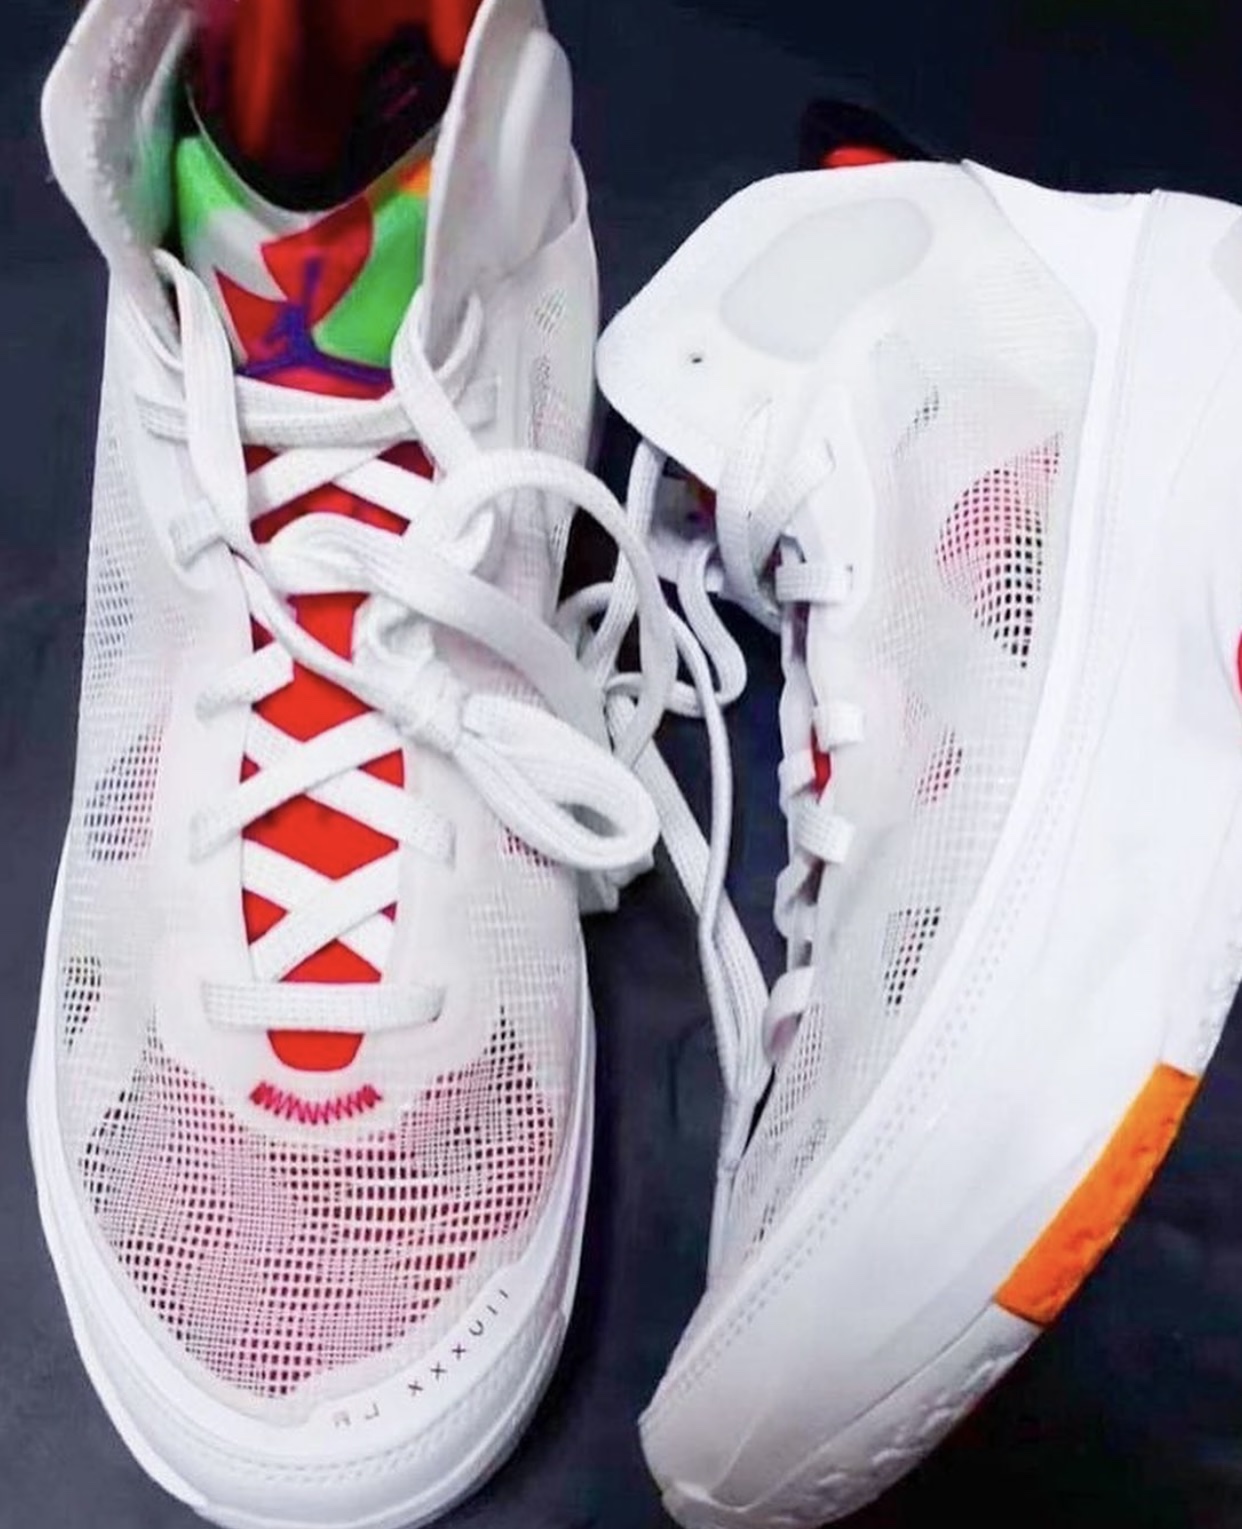 Jordan XXXVII “Hare” is Now Available for $65 Less